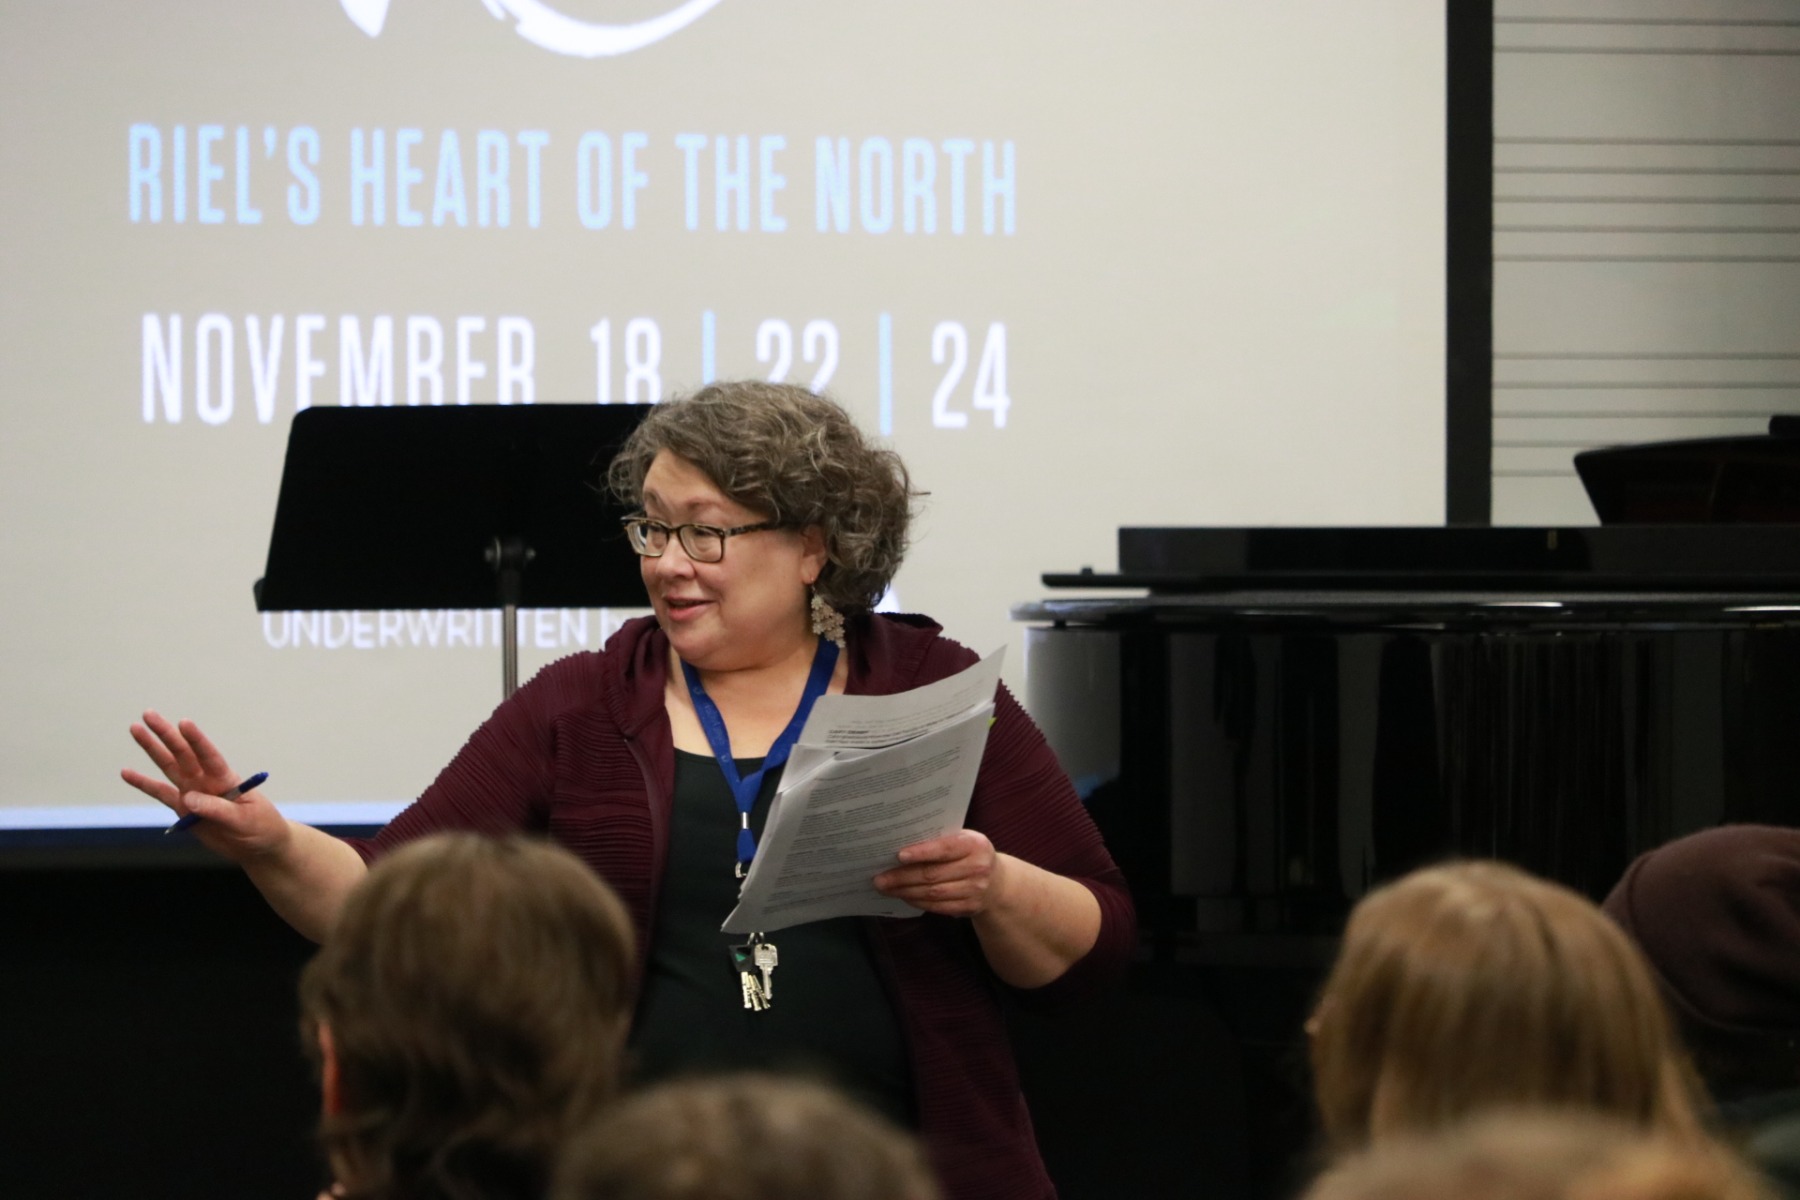 Desautels Faculty of Music musicologist Colette Simonot-Maiello gives background about Indigenous representation in operas to Desautels Faculty of Music students before a sneak peek into Manitoba Opera's Li Keur: Riel's Heart of the North.